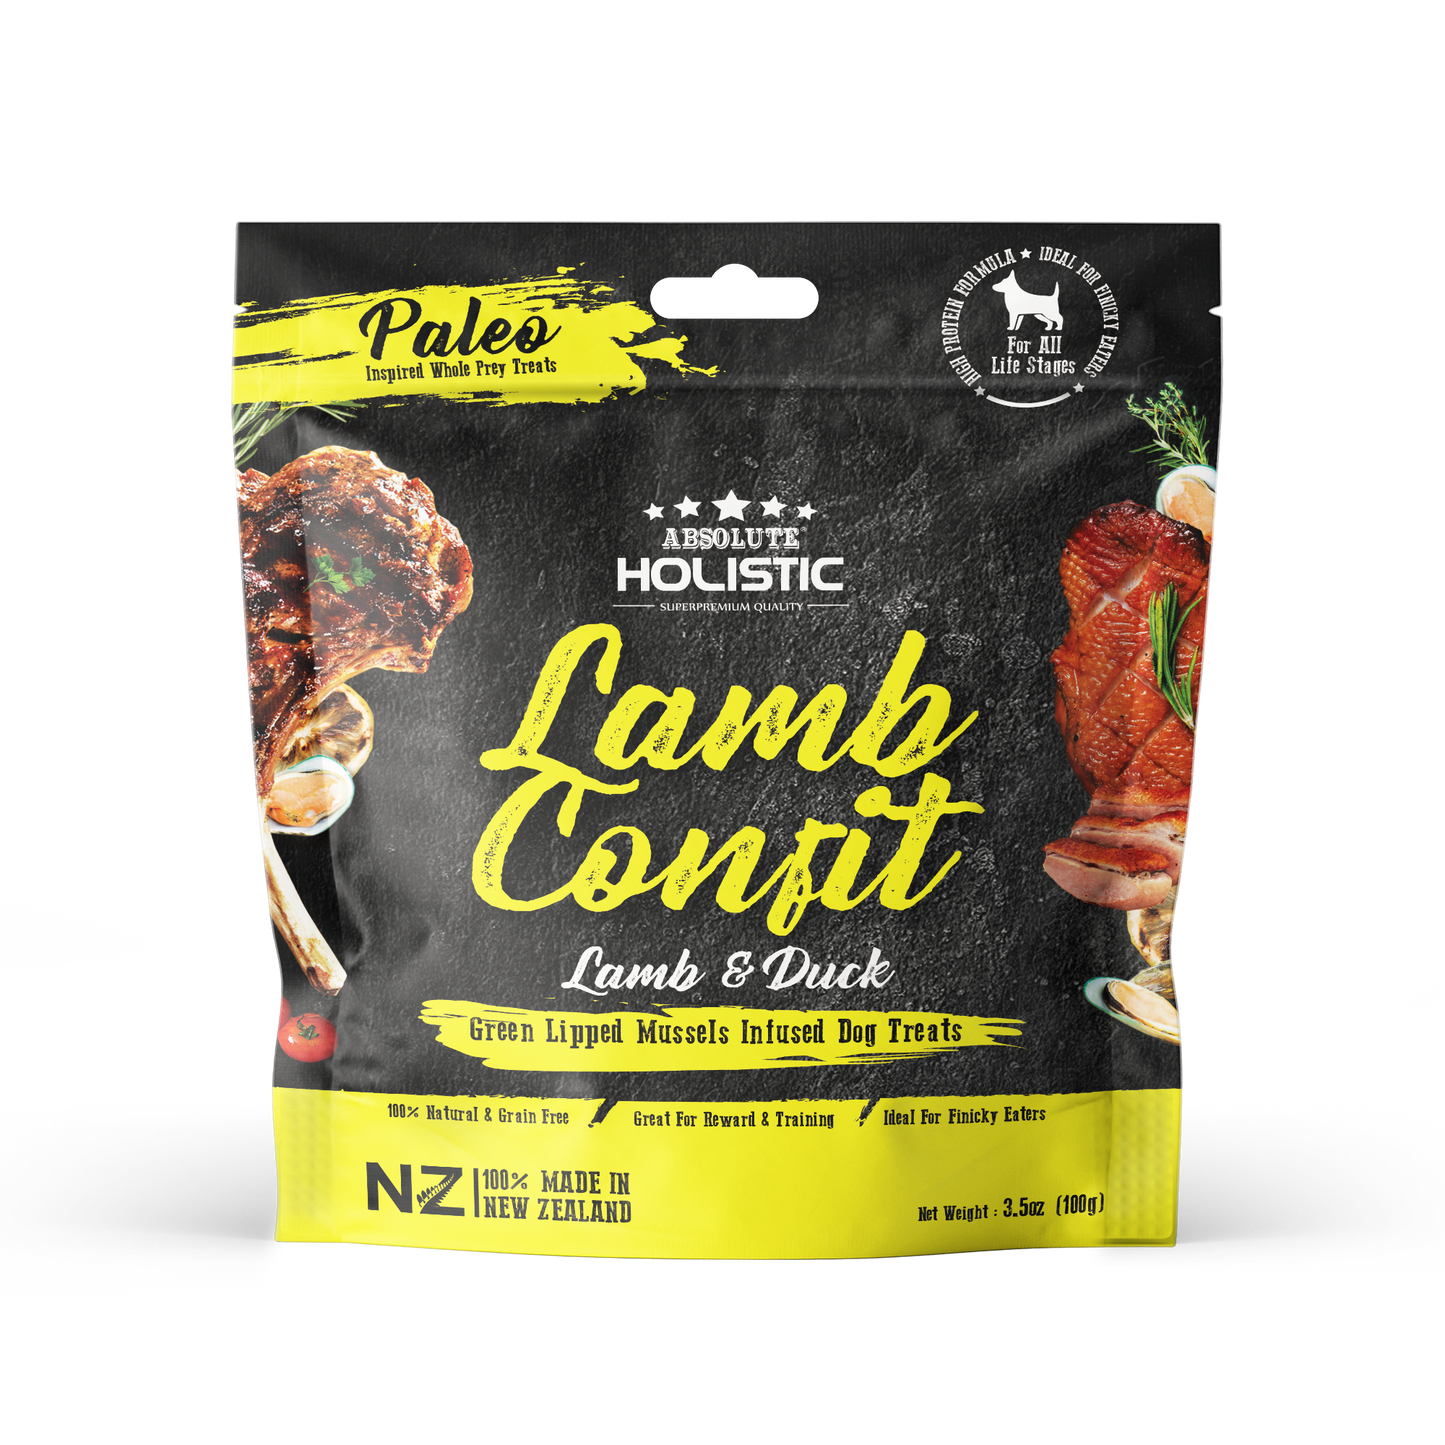 [3 for $3.60 OFF] Absolute Holistic Air Dried Lamb & Duck Dog Treats 100g